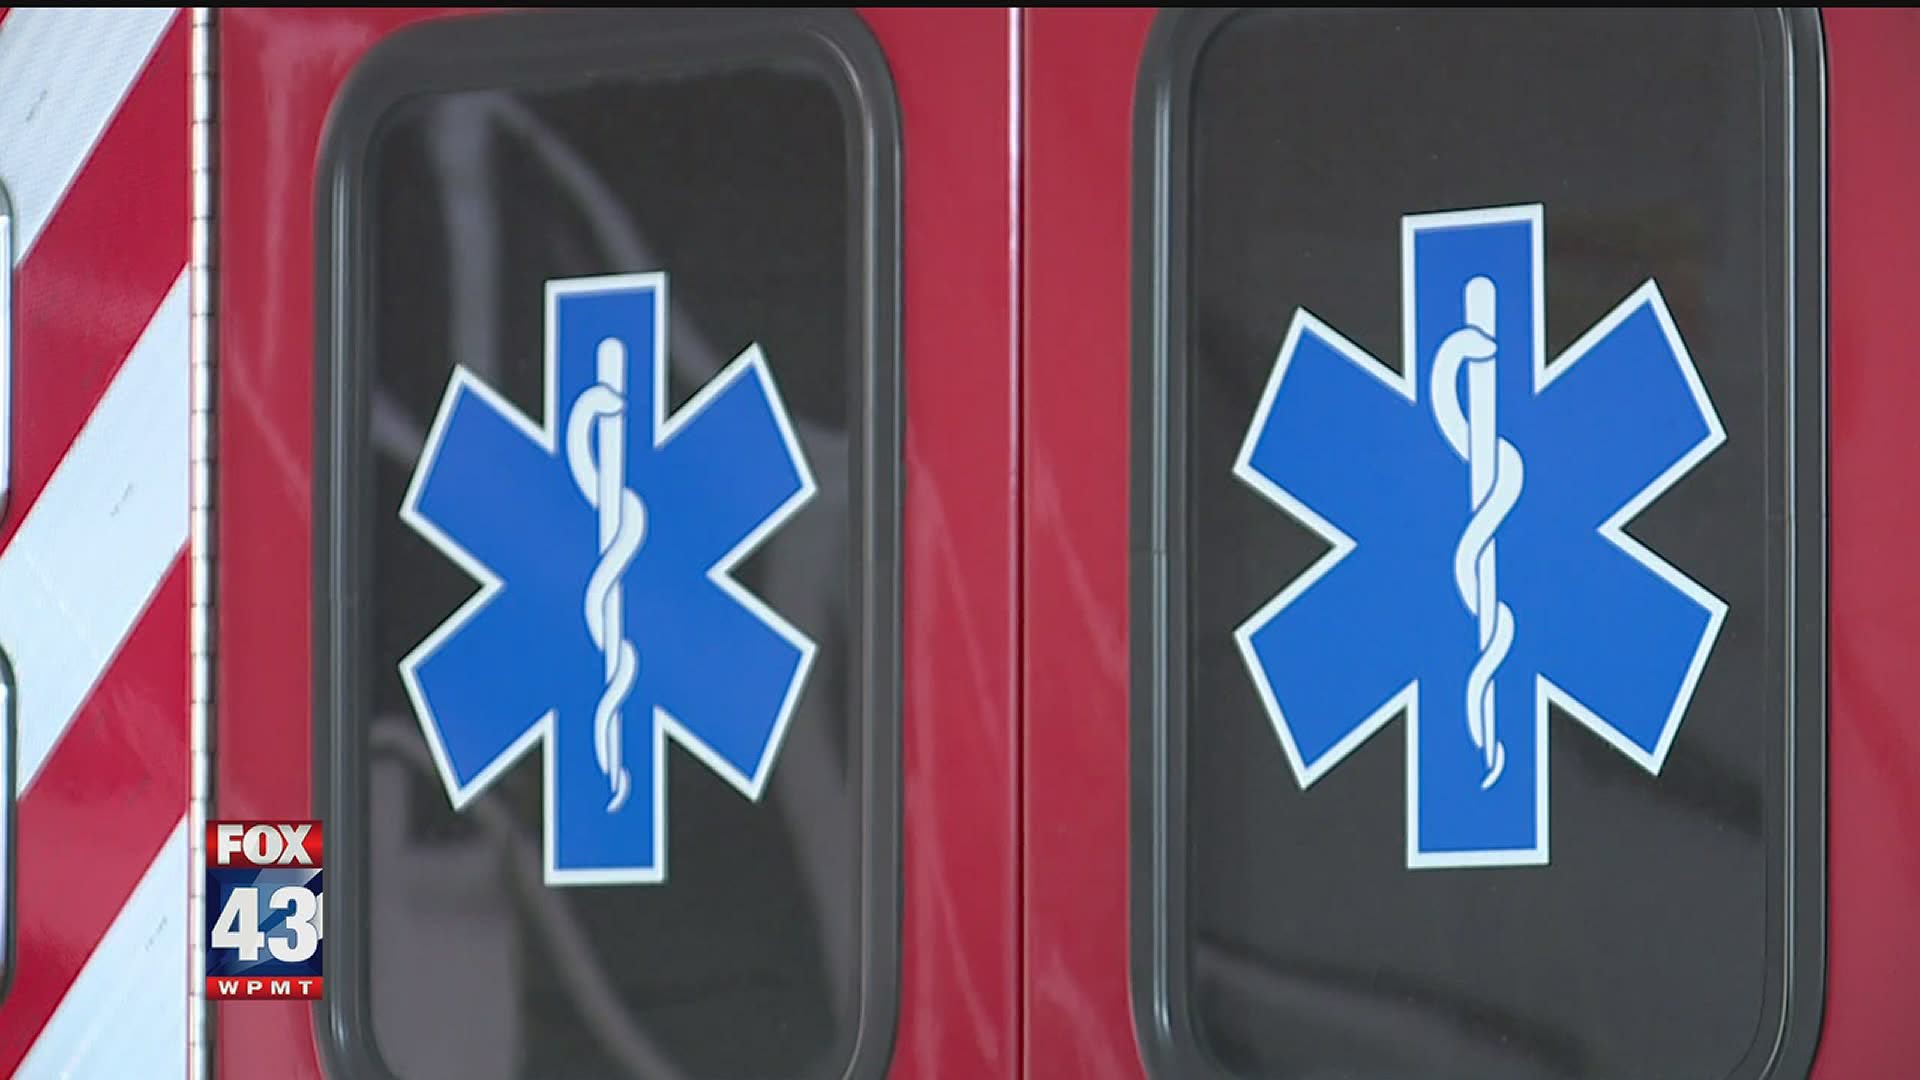 Pennsylvania EMS agencies are raising an outcry after learning they received none of the $50 million in hazard pay grants distributed by the state.